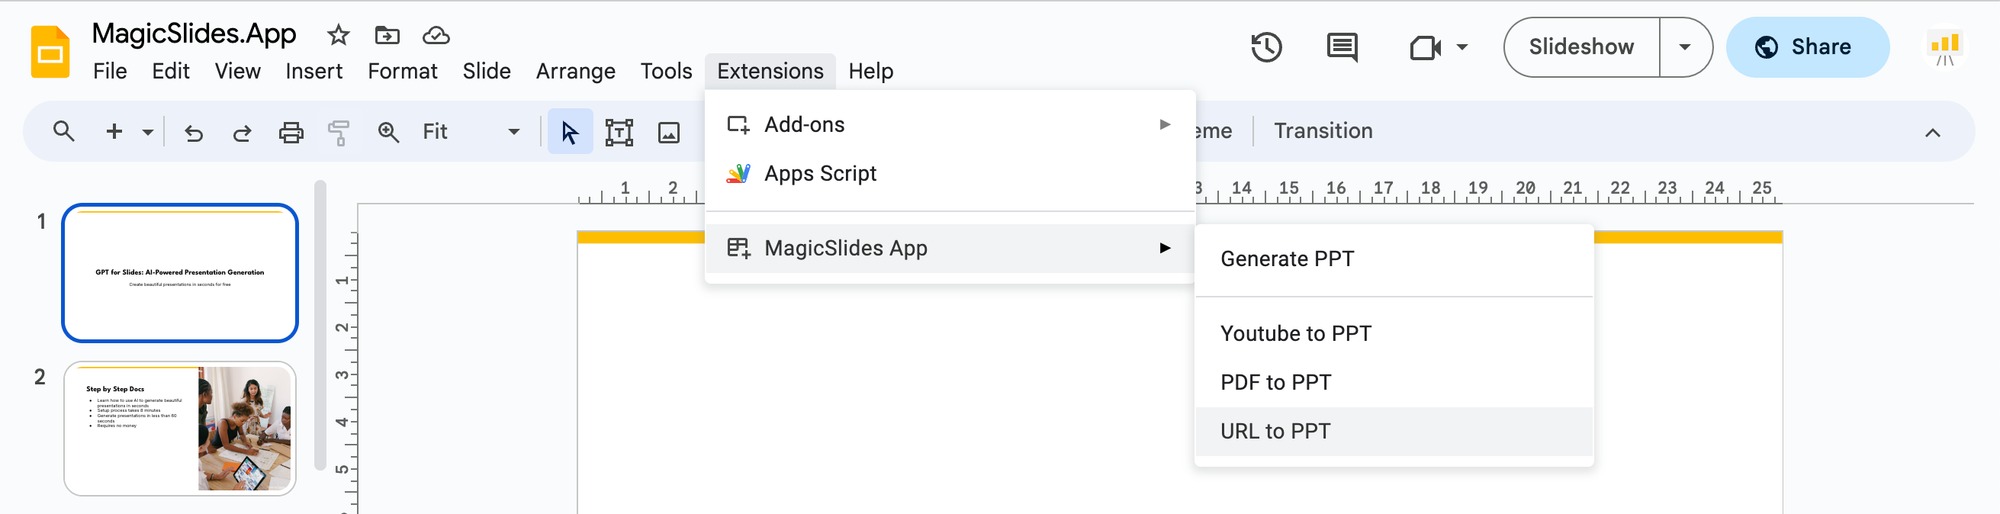 launching MagicSlides app URL to PPT feature